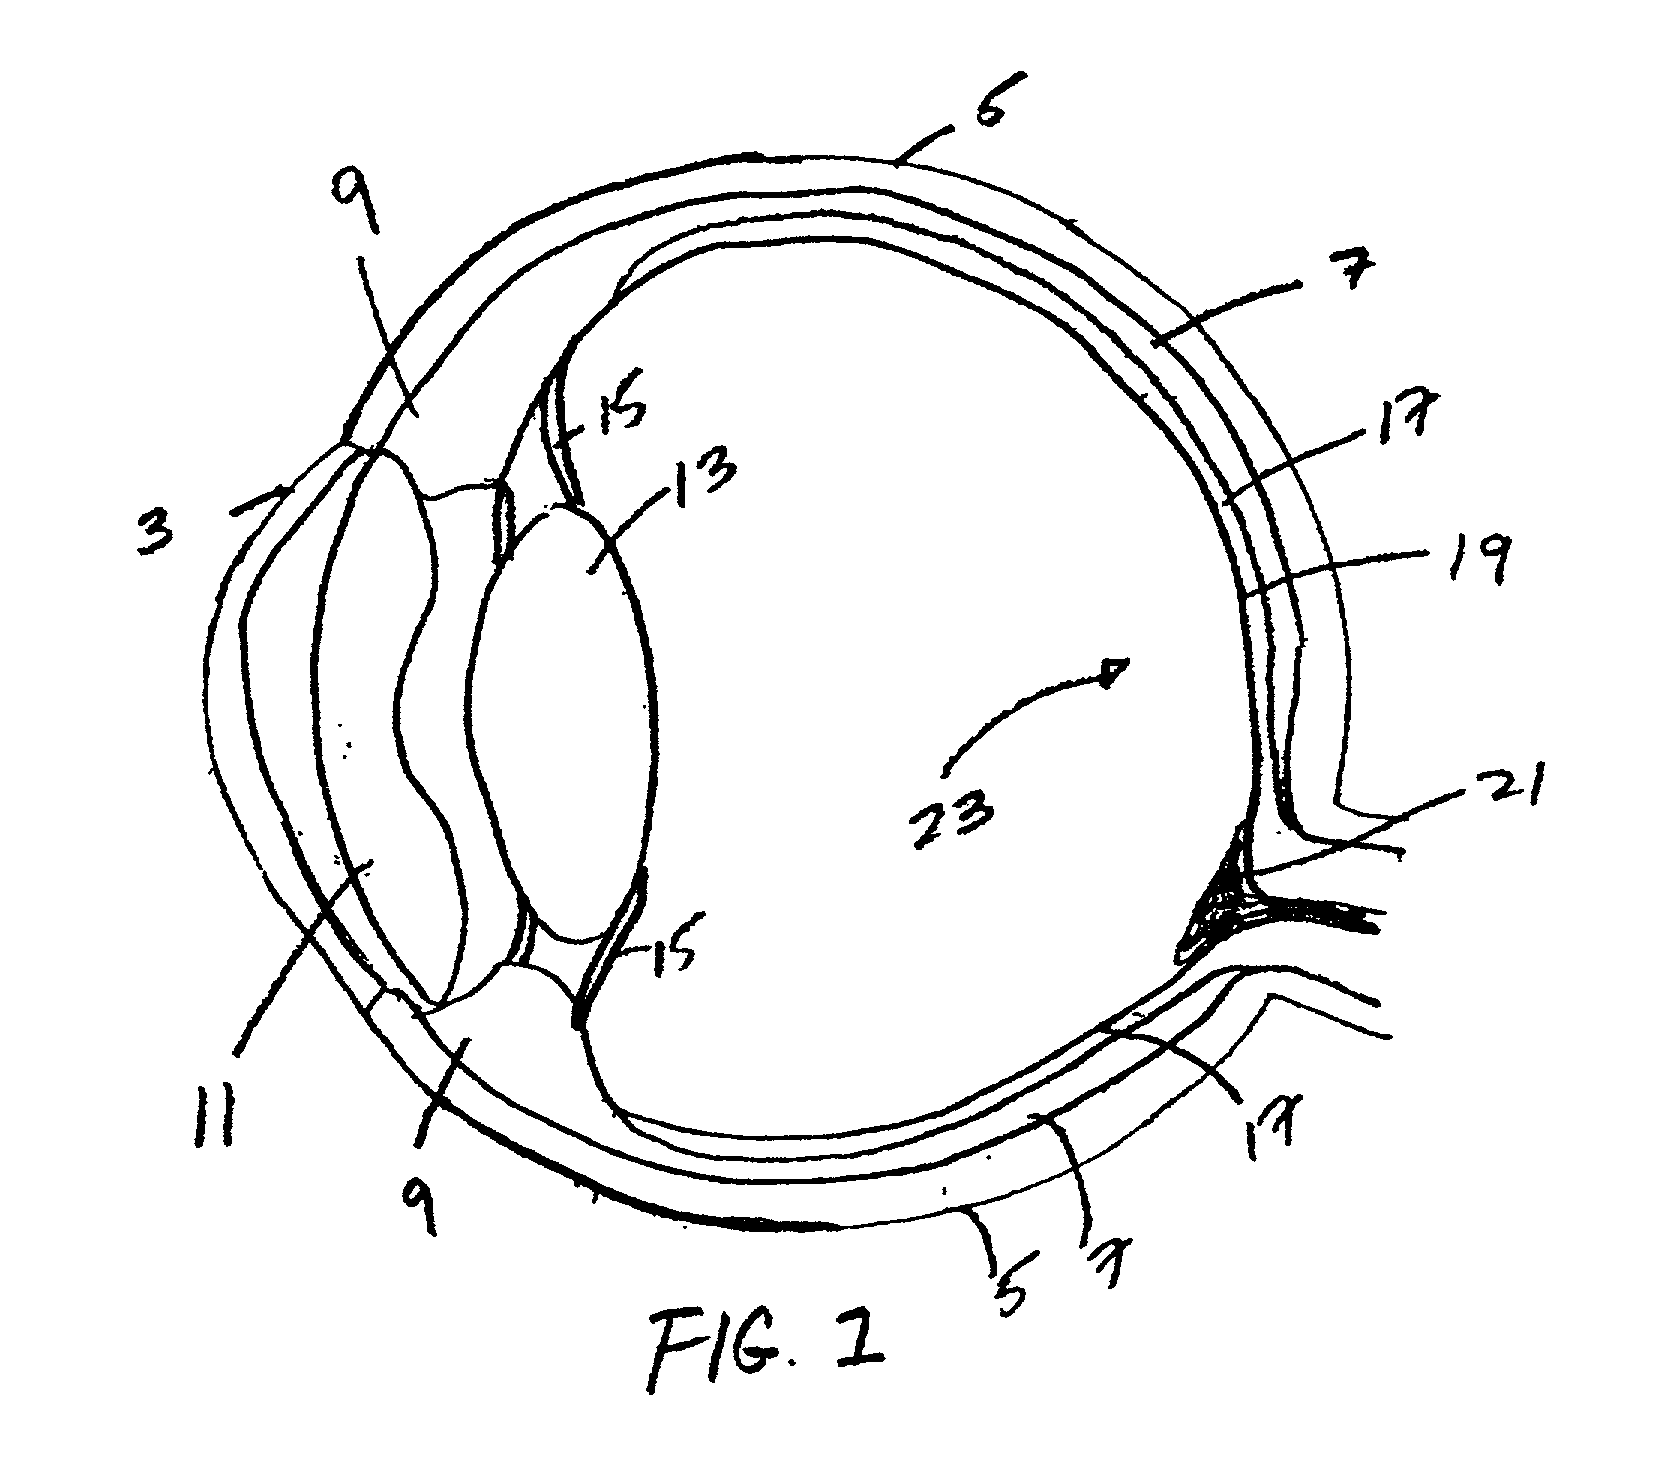 Method of treating the human eye with a wavefront sensor-based ophthalmic instrument